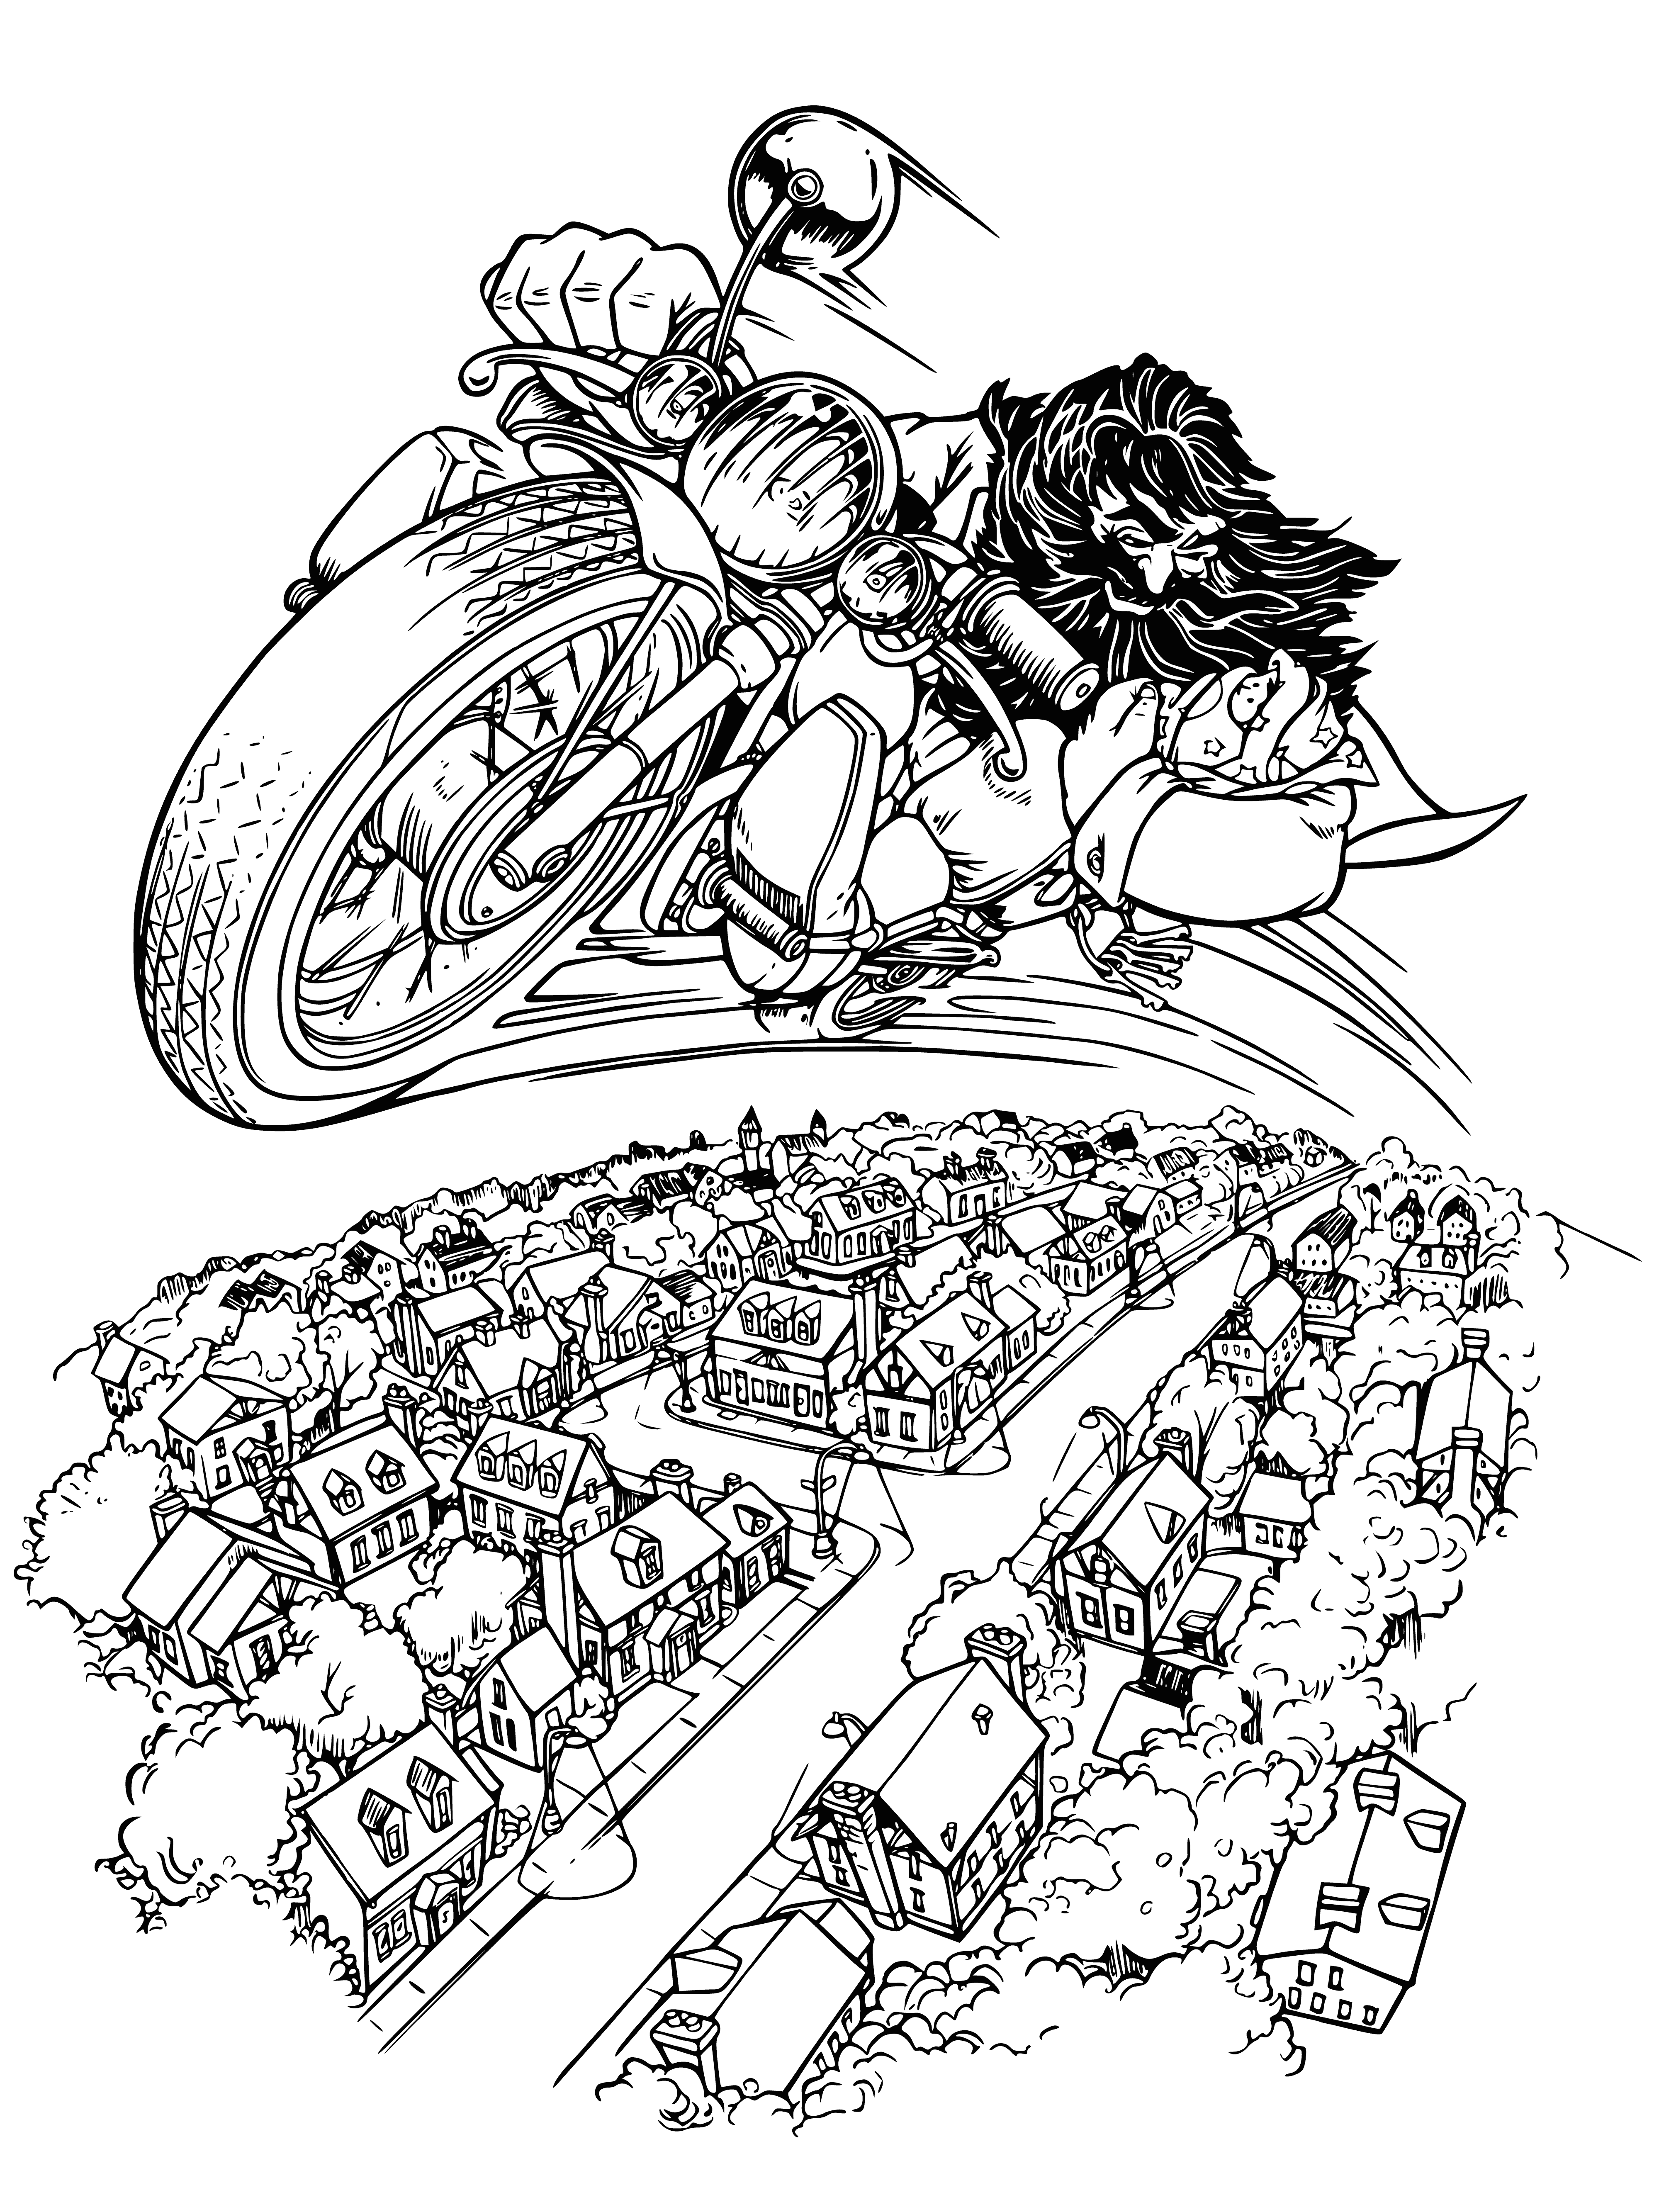 Hagrid on a motorcycle coloring page